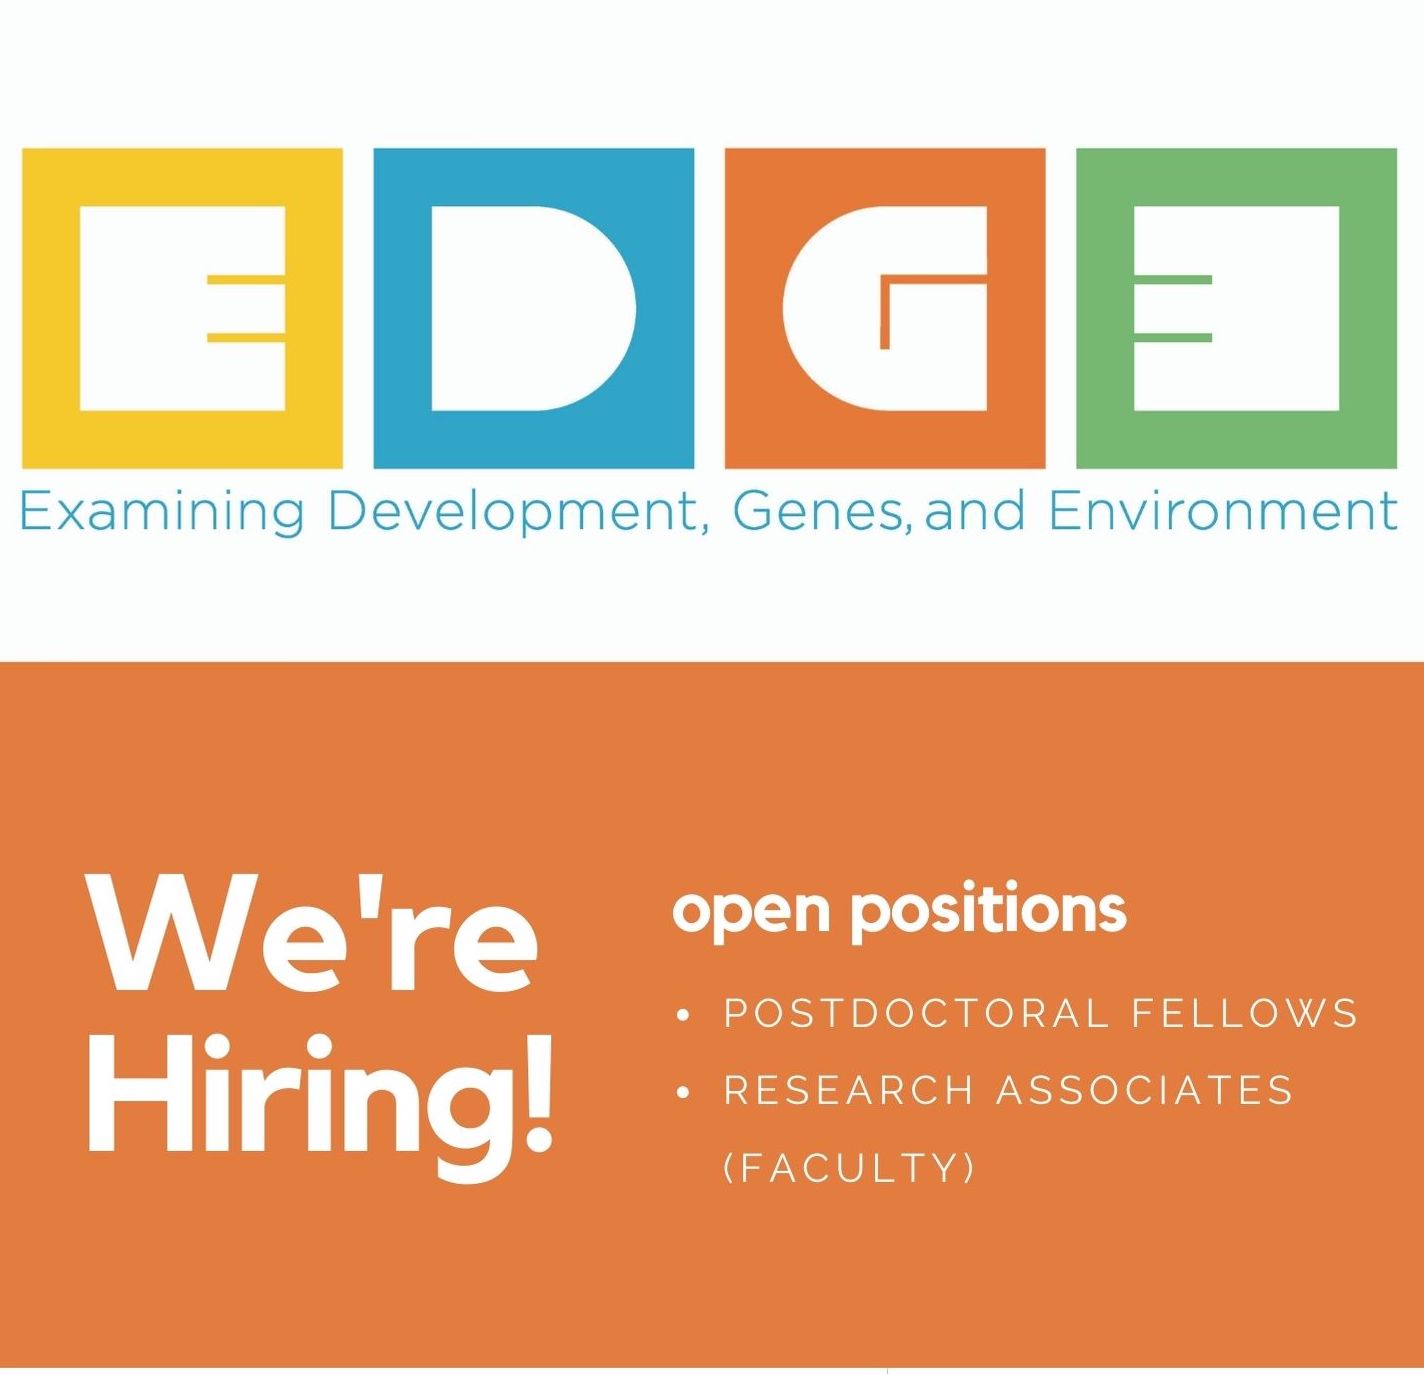 Come work with the EDGE Lab!